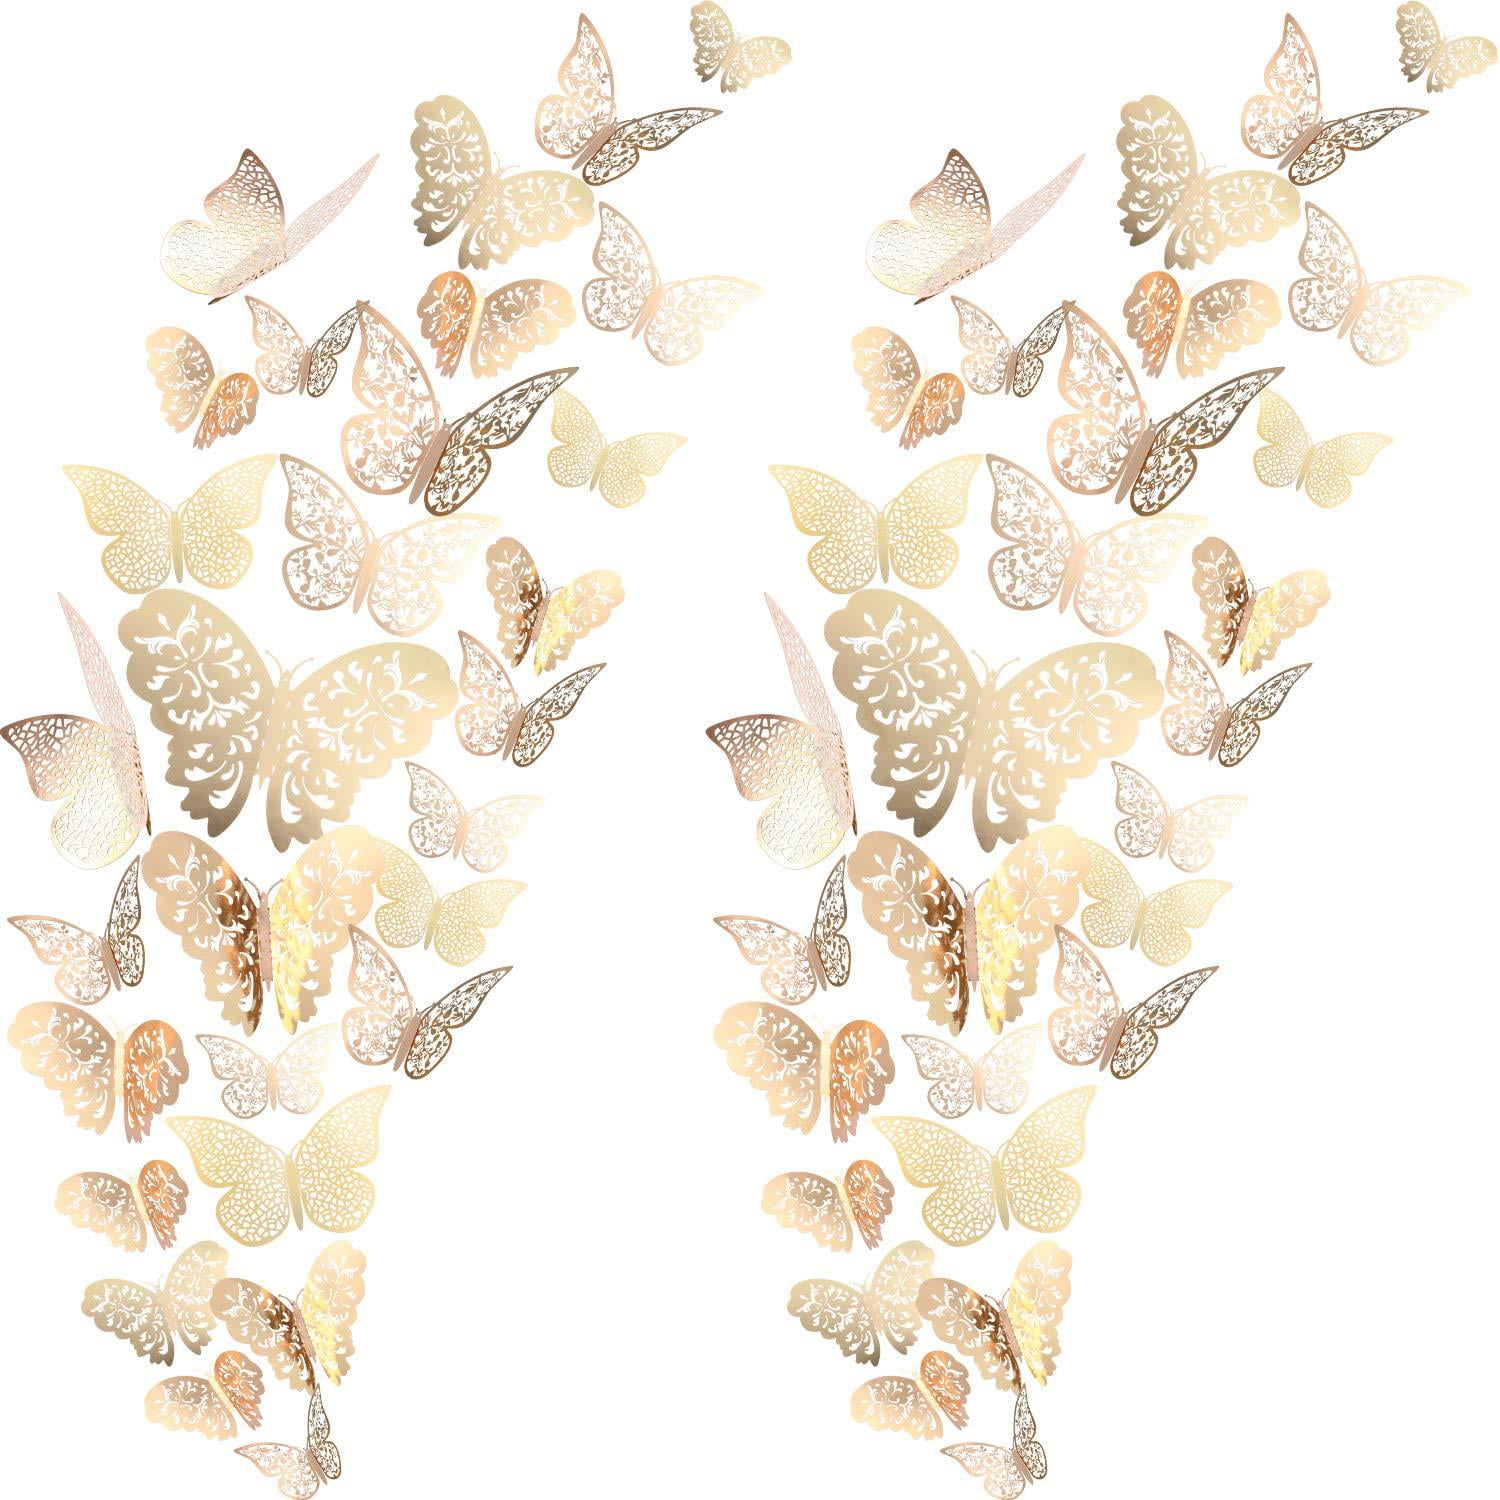 72 Pieces 3D Butterfly Wall Decals Sticker Wall Decal Decor Art Decorations Sticker Set 3 Sizes for Room Home Nursery Classroom Offices Kids Girl Boy Bedroom Bathroom Living Room Decor Rose Gold 